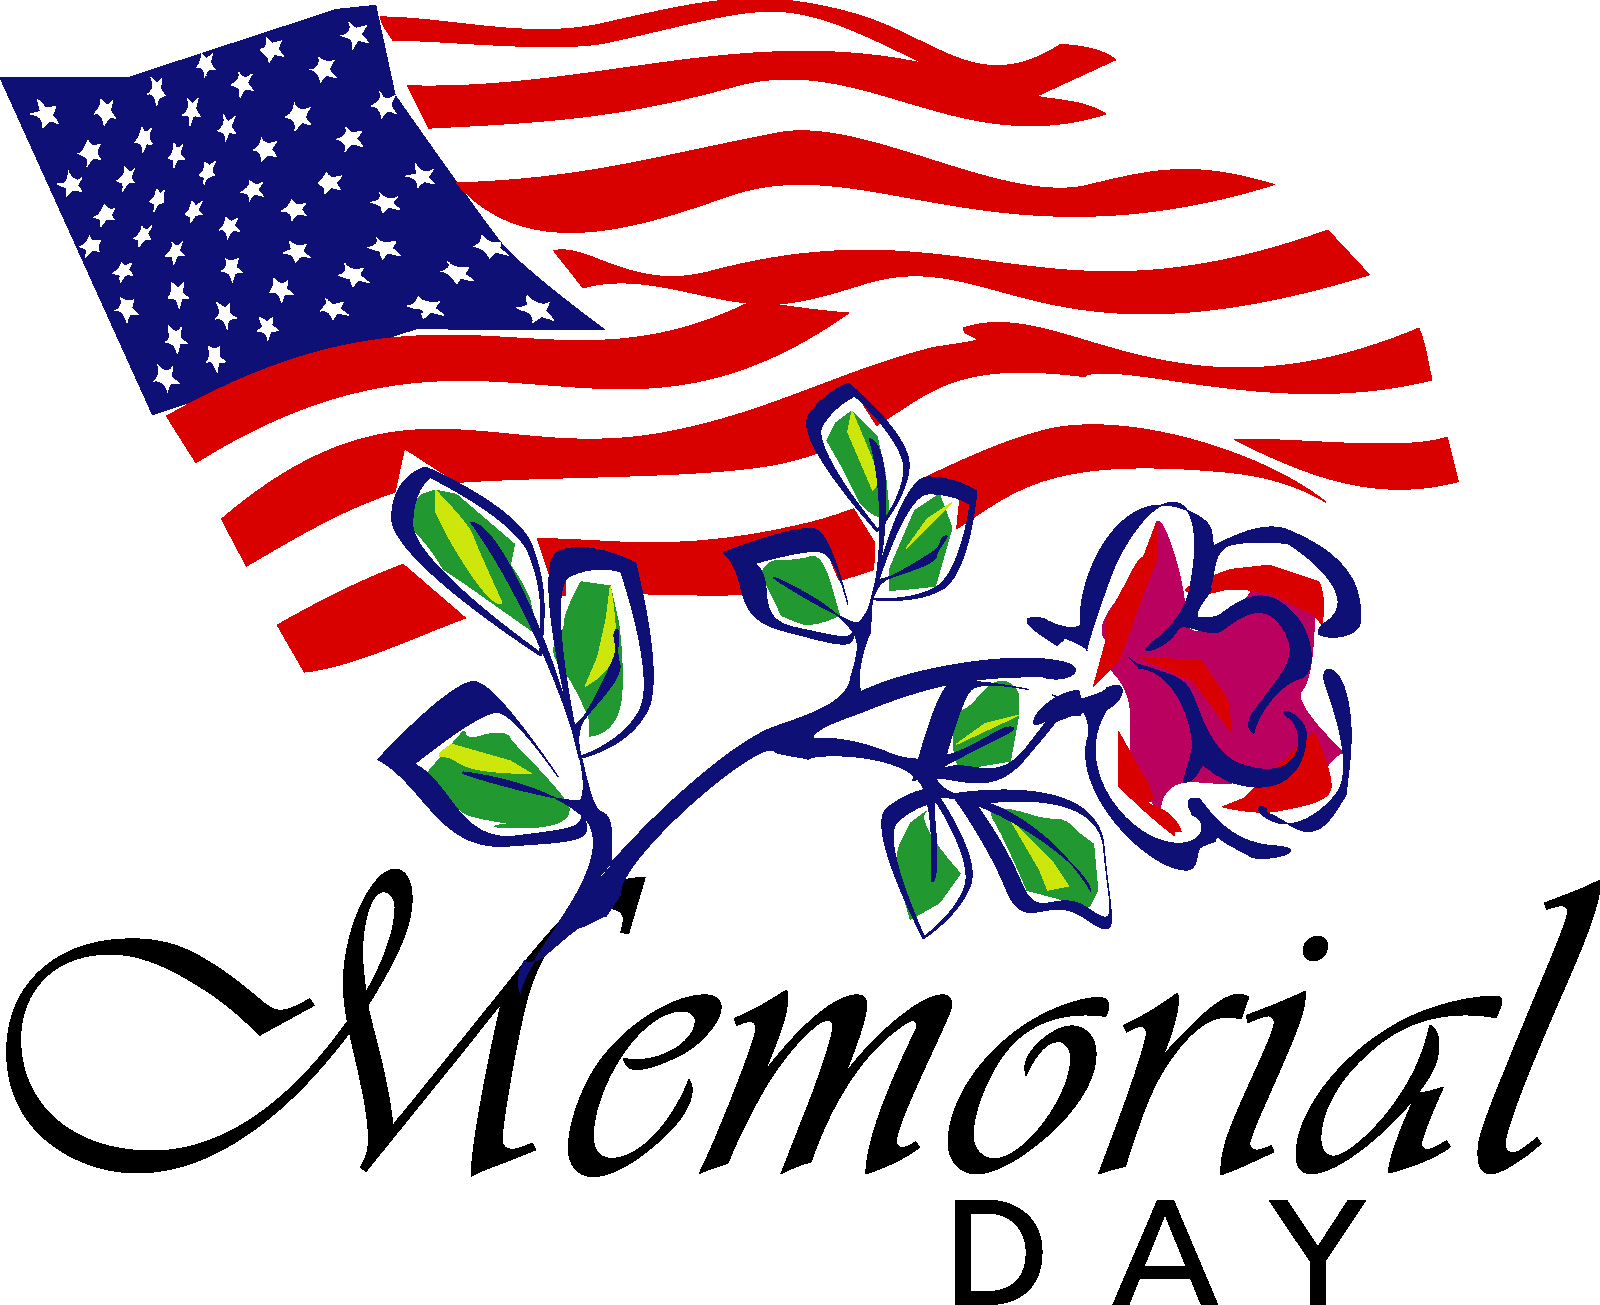 memorial day 2014 clipart - all the Gallery you need!